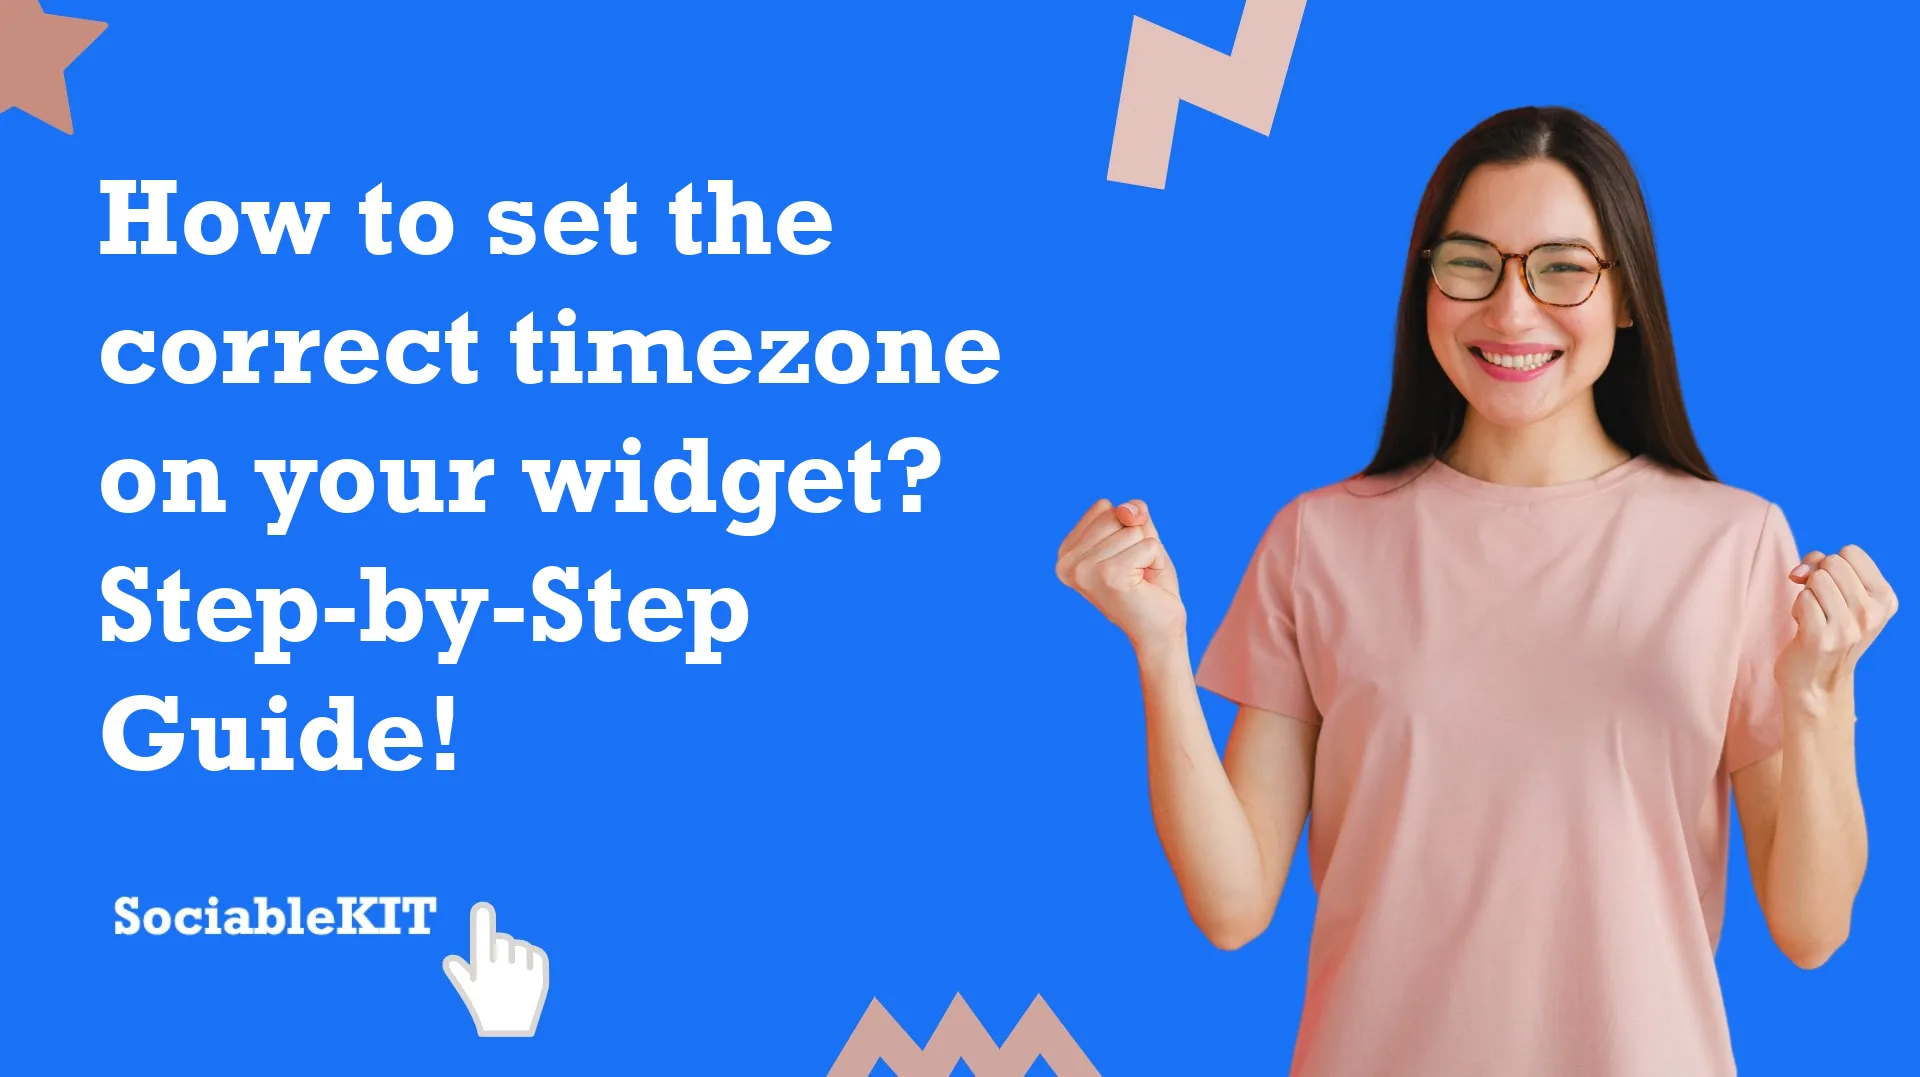 How to set the correct timezone on your widget? Step-by-Step Guide!